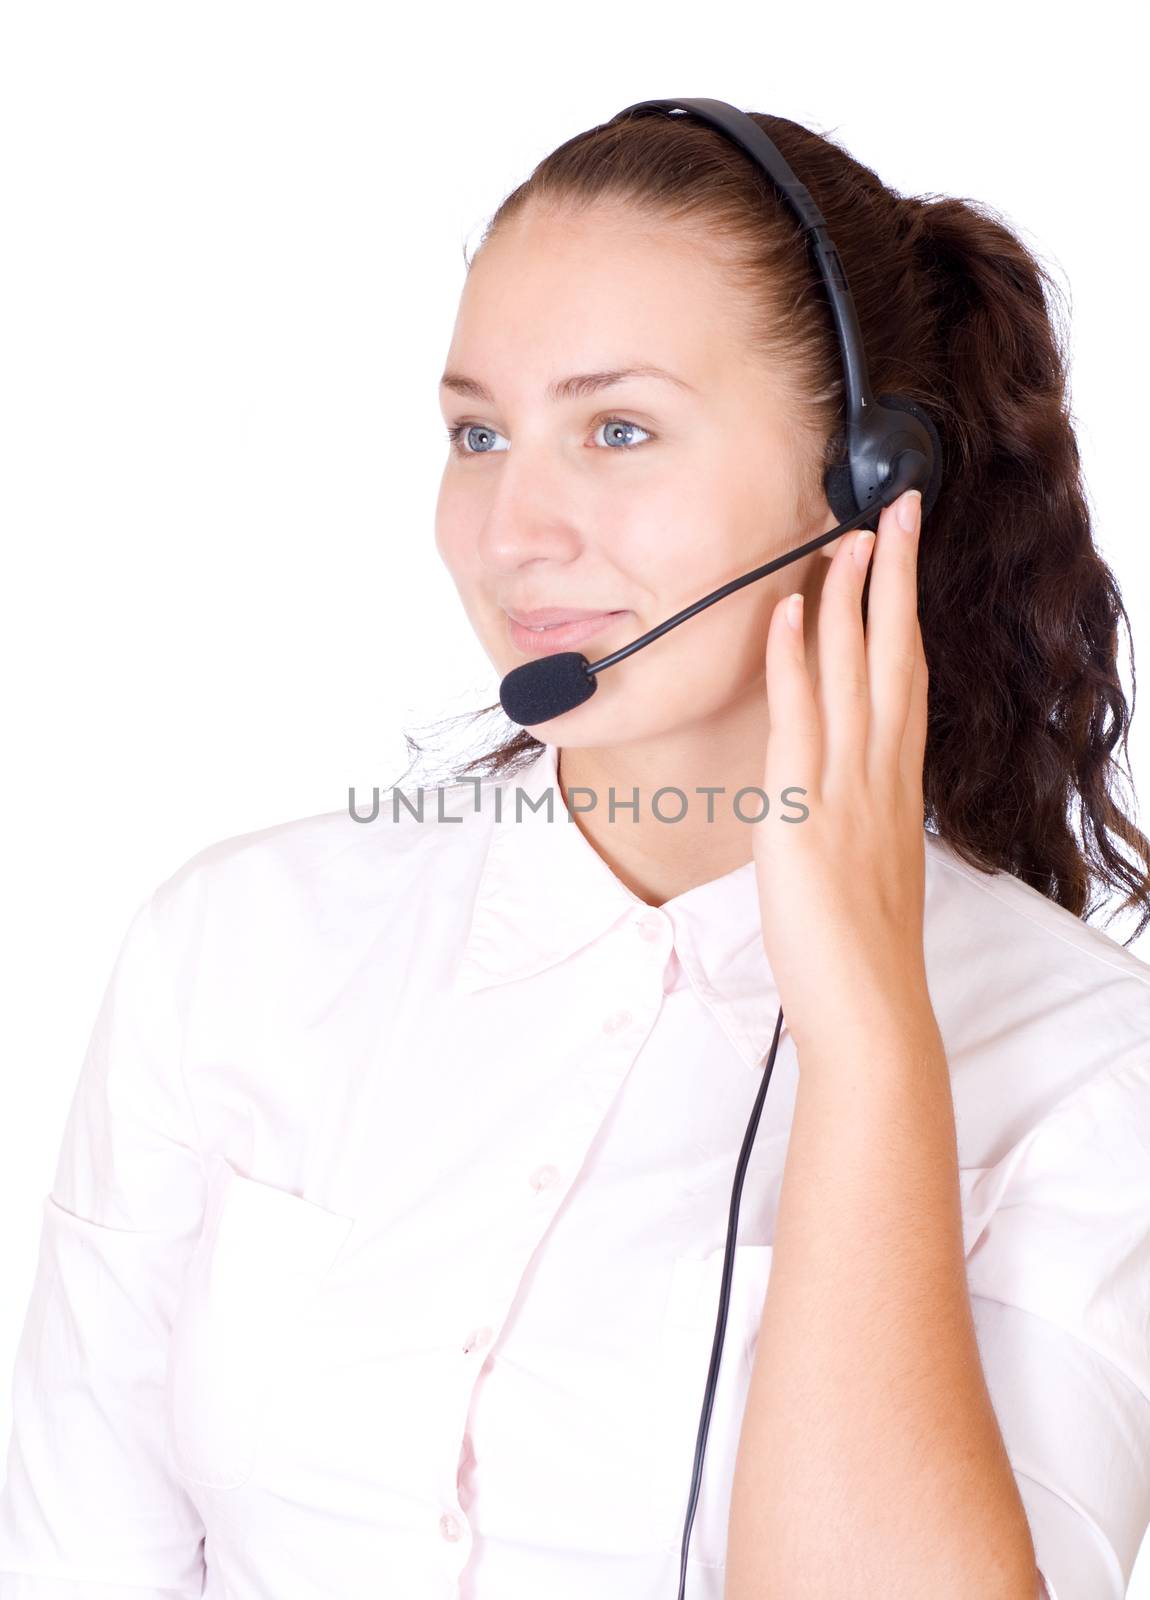 CUSTOMER SERVICE AGENT LOOKING TO THE FUTURE